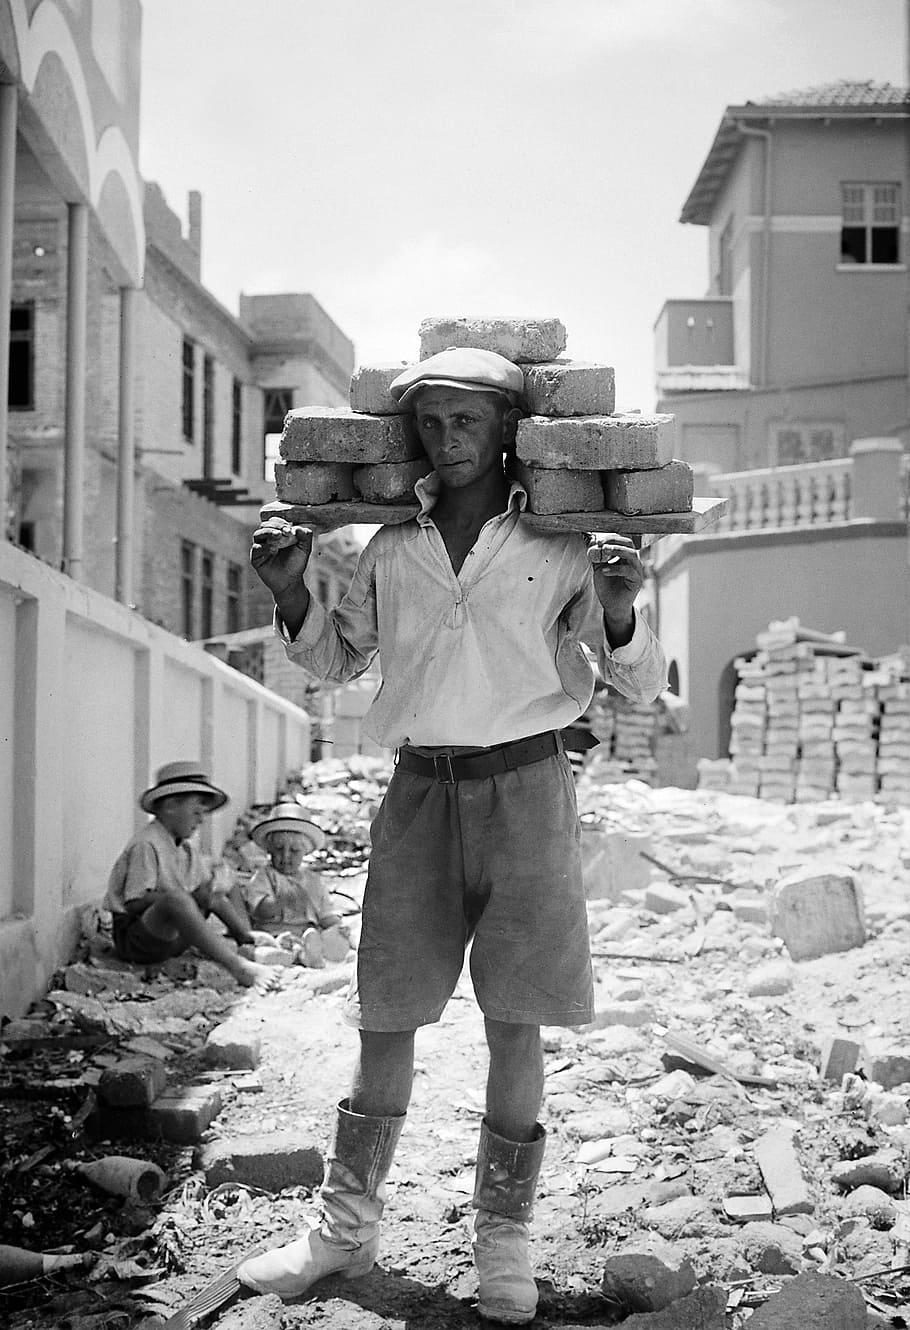 Builder, Tel Aviv, Israel, construction worker, photos, public domain, vintage, people, outdoors, black And White